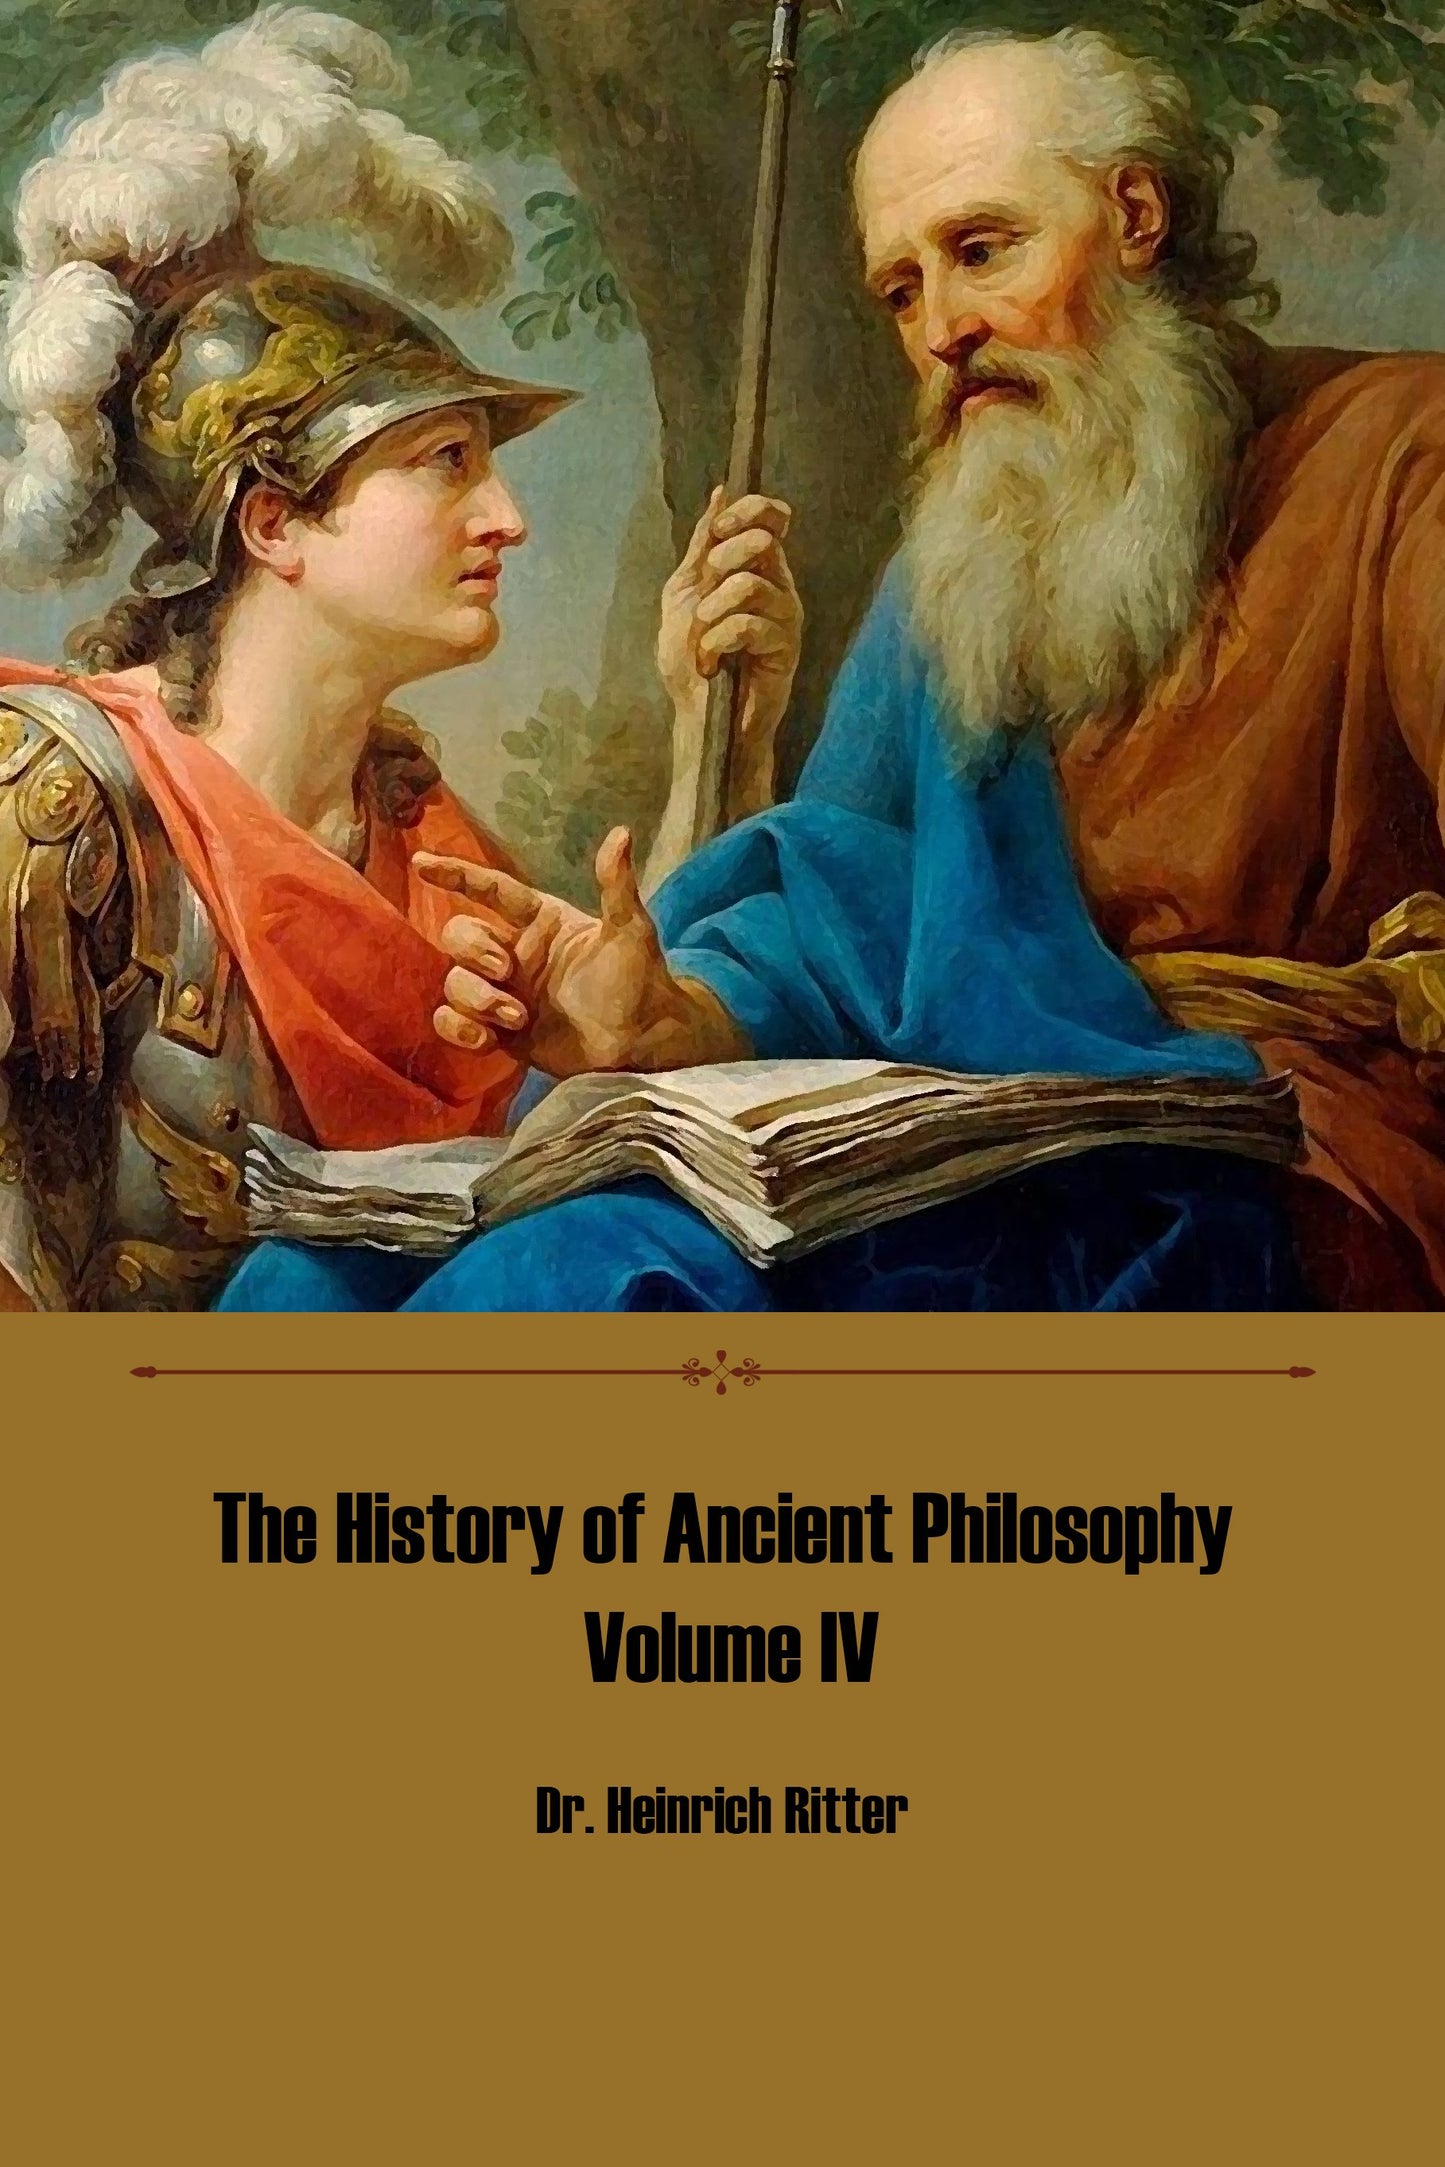 The History of Ancient Philosophy Volume IV